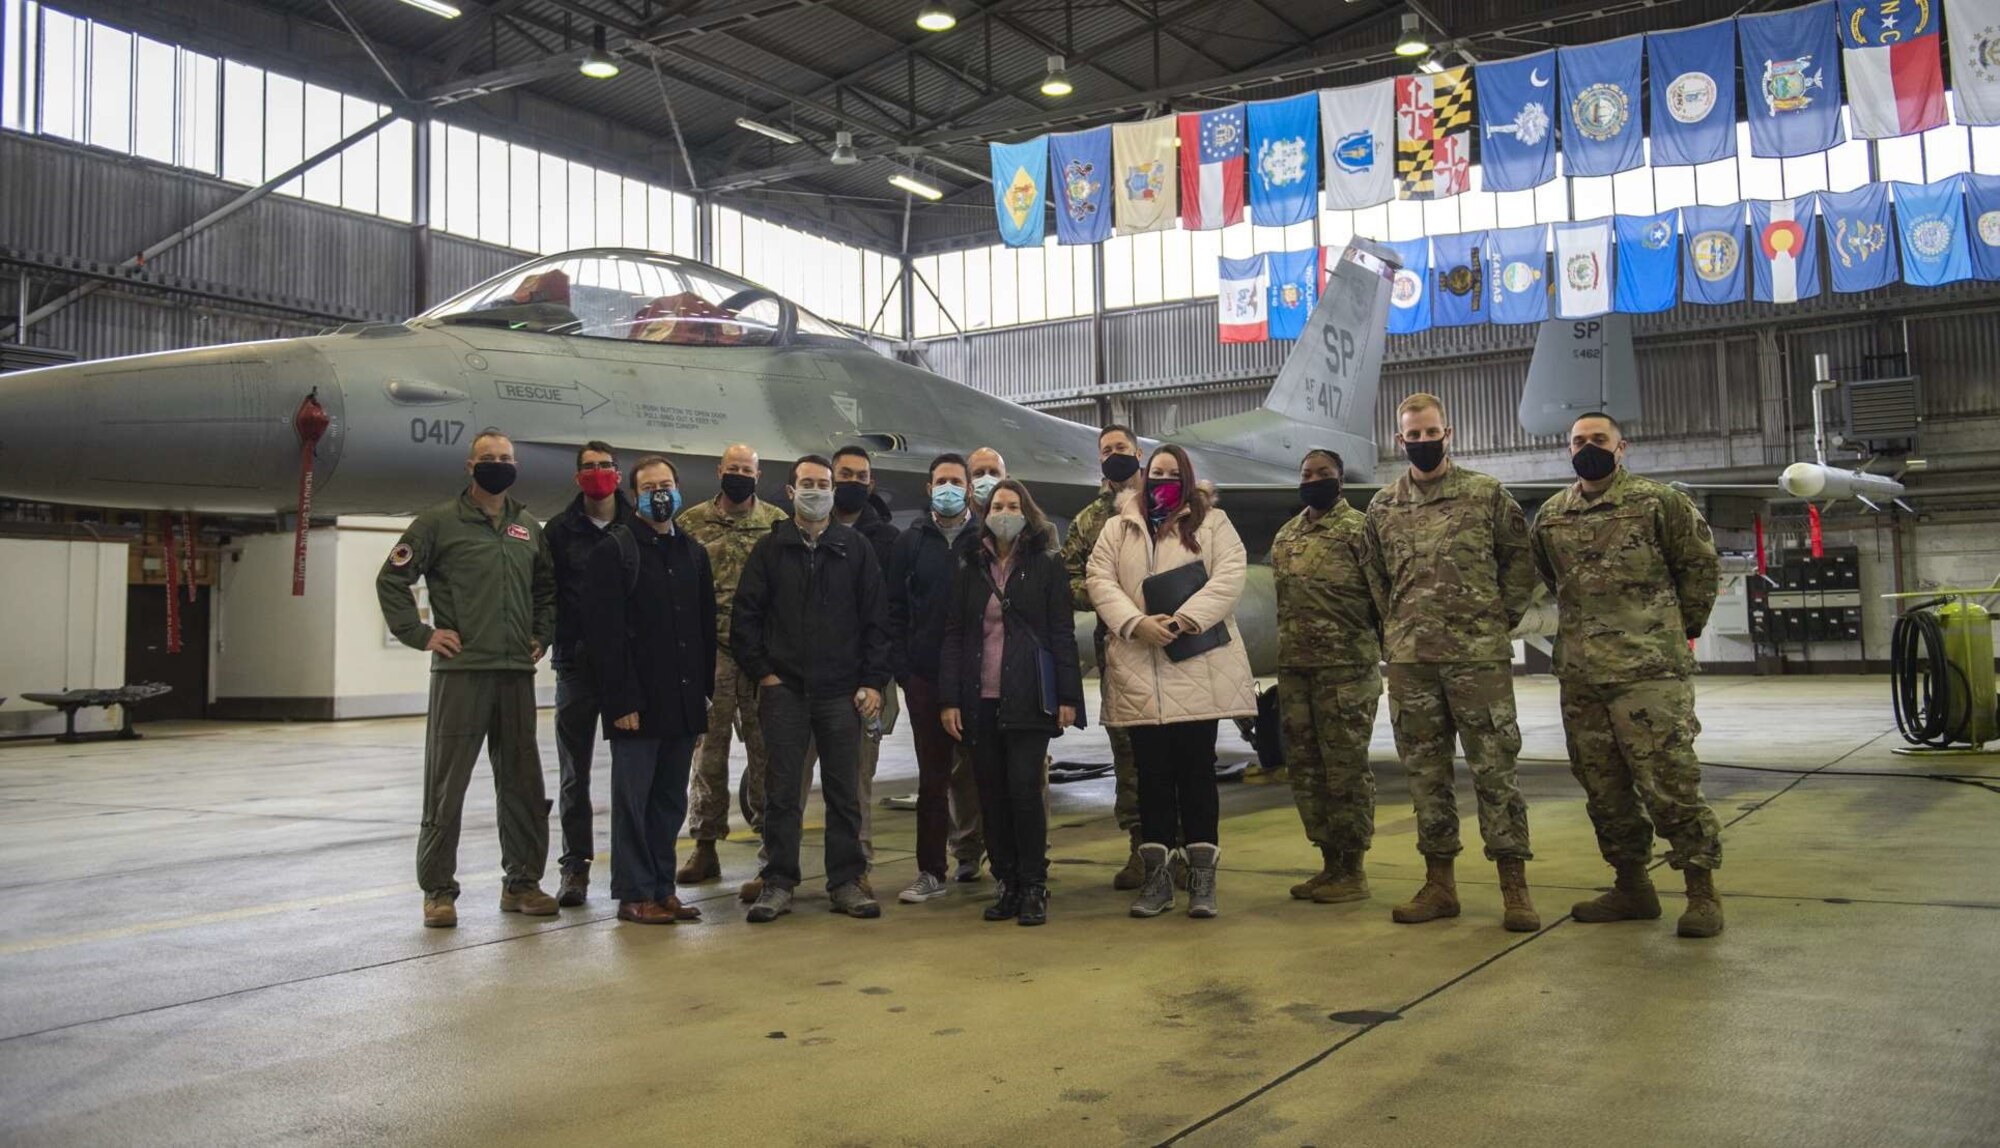 U.S. Air Force Airmen and participants of the Civilian Leadership Development Program pose for a photo in front of an F-16 Fighting Falcon at Spangdahlem Air Base, Germany, Oct. 6, 2020. The CLDP program seeks to broaden civilian participant's knowledge of the USAFE-AFAFRICA mission, structure, culture and business activities of key organizations.
(U.S. Air Force photo by Airman 1st Class Alison Stewart)